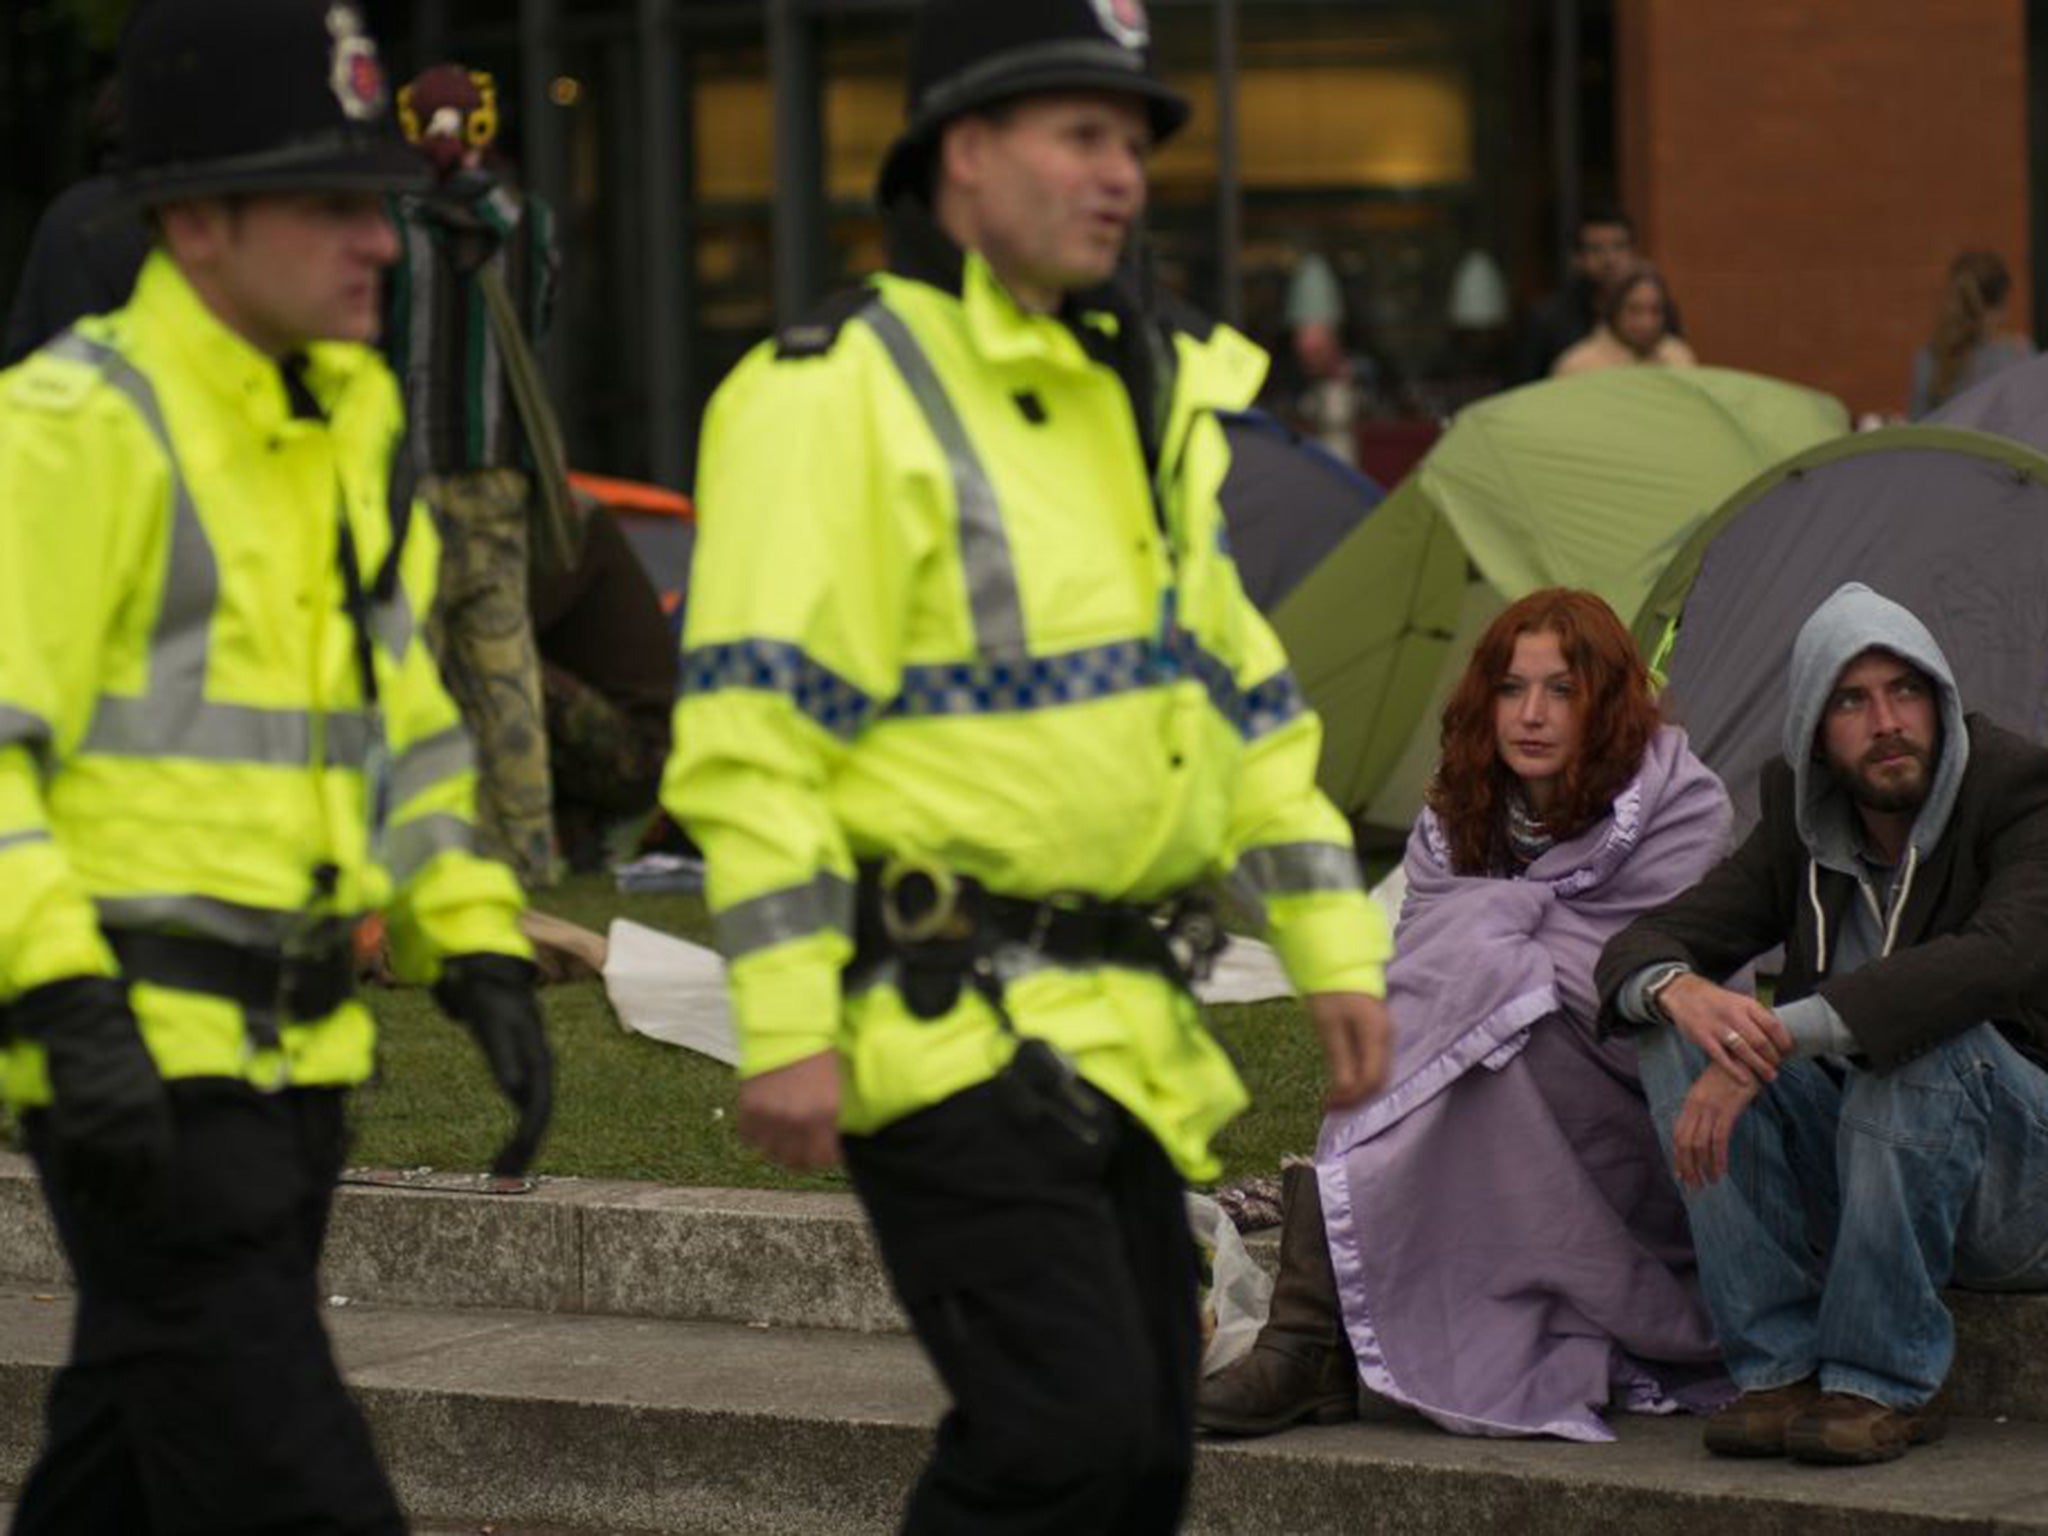 Anti-austerity protesters gather in Manchester's Piccadilly Gardens on the eve of the 2015 annual Conservative Party Conference